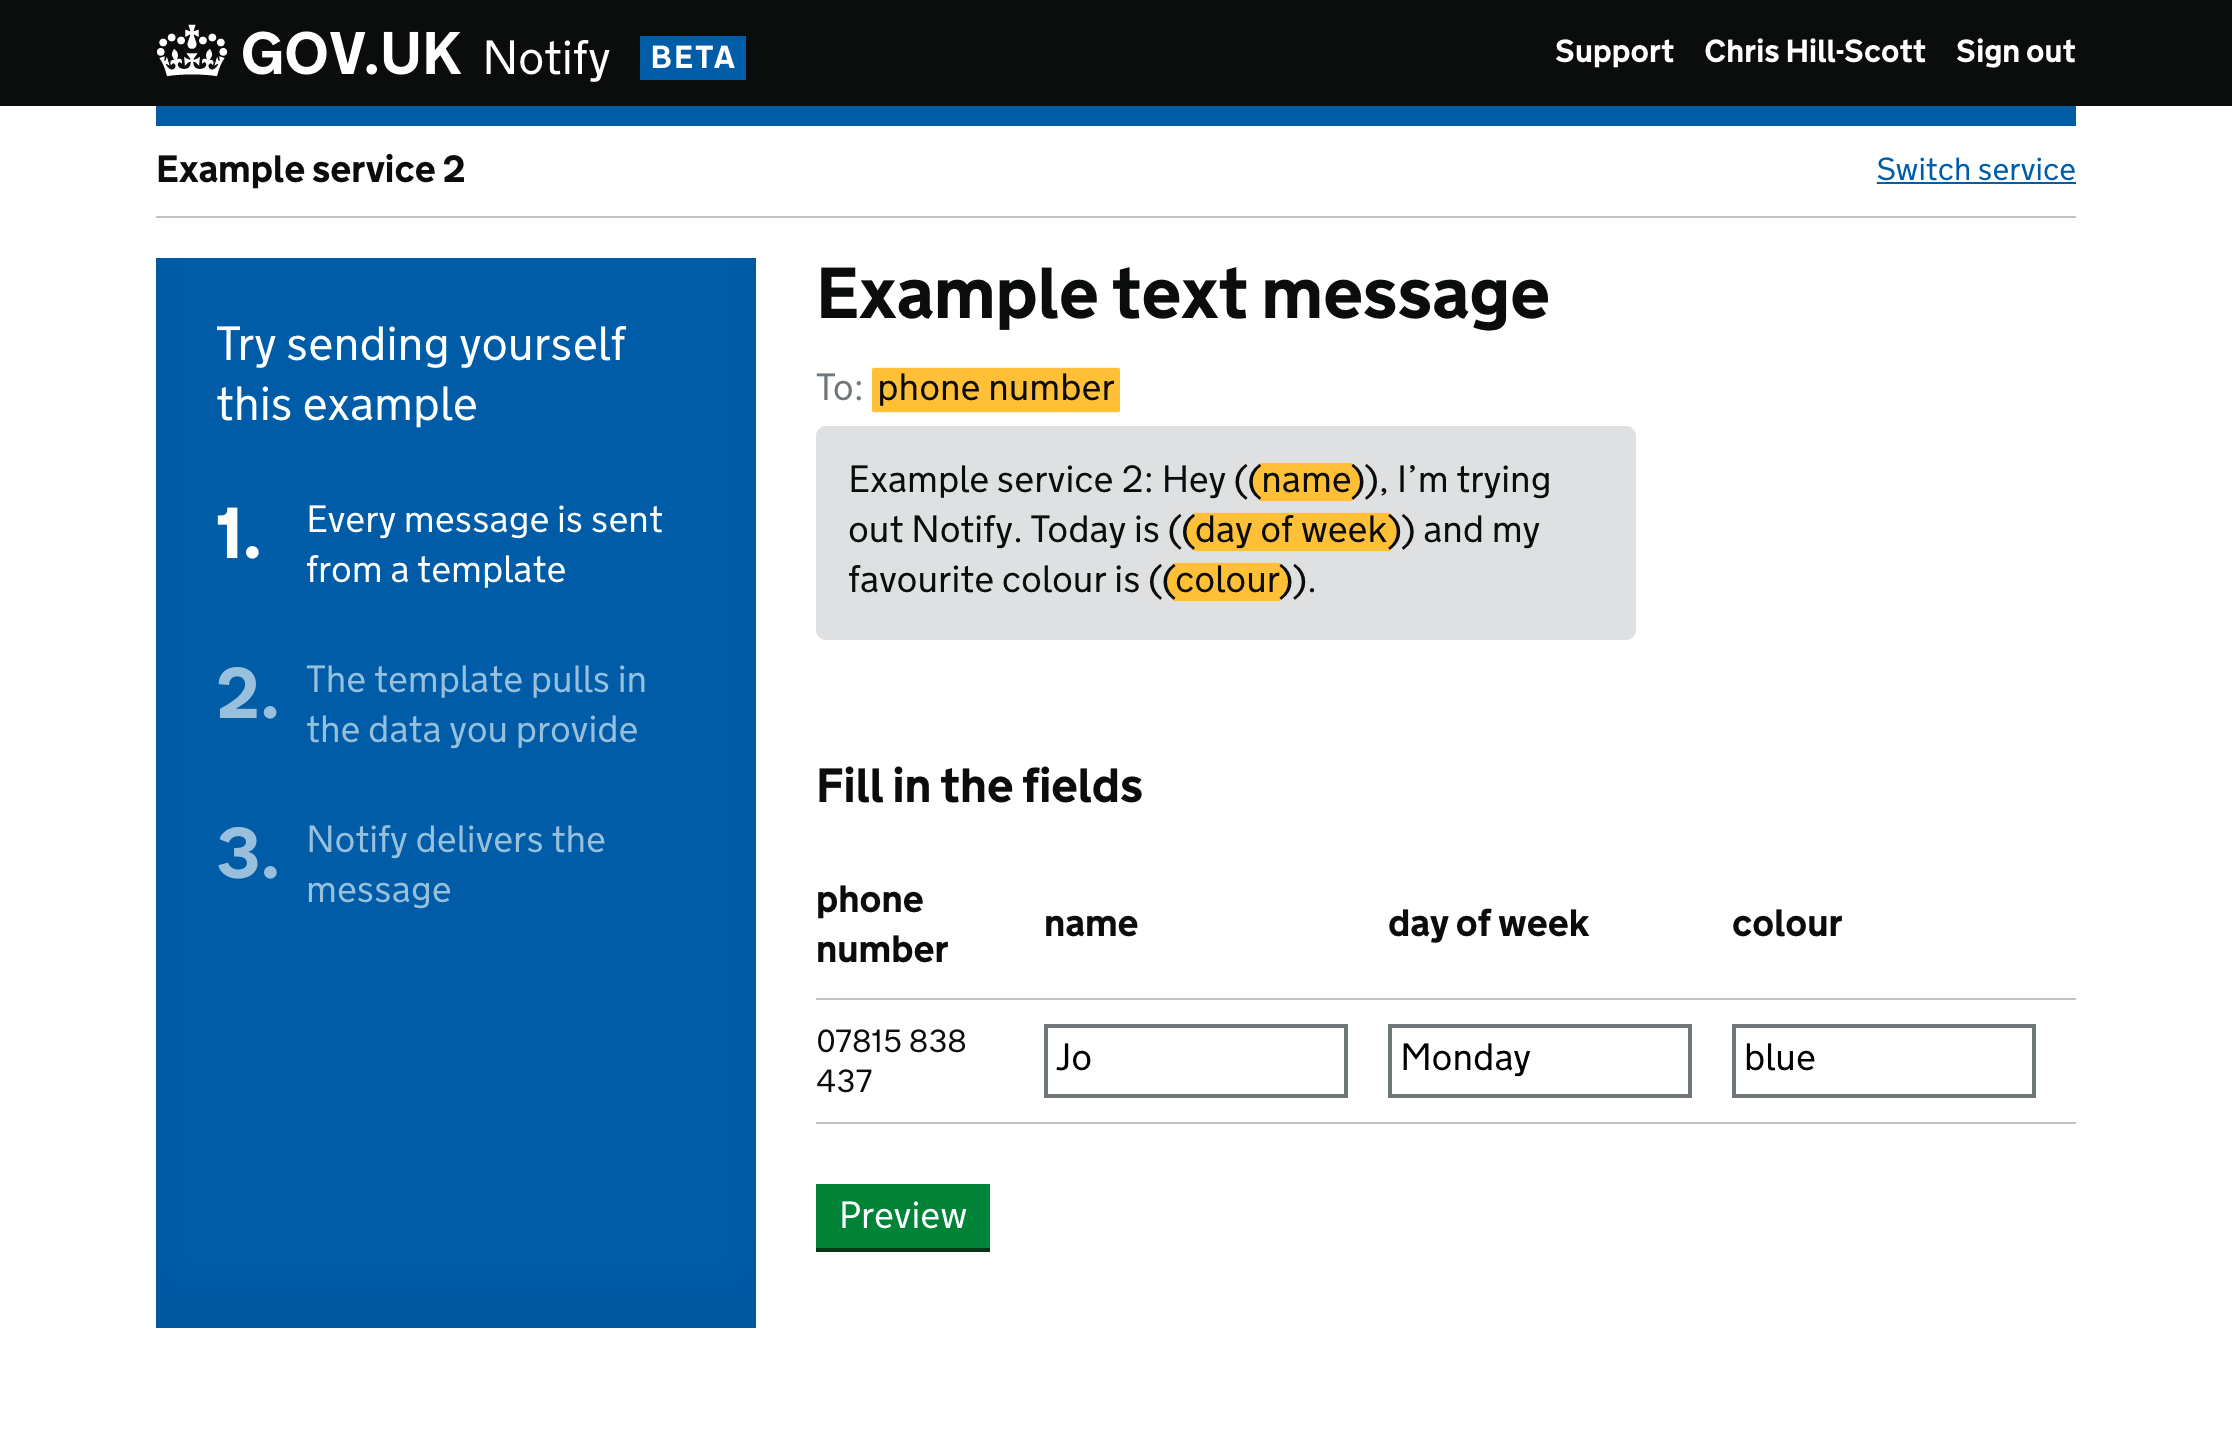 Image from GOV.UK Notify showing civil servants how to format data